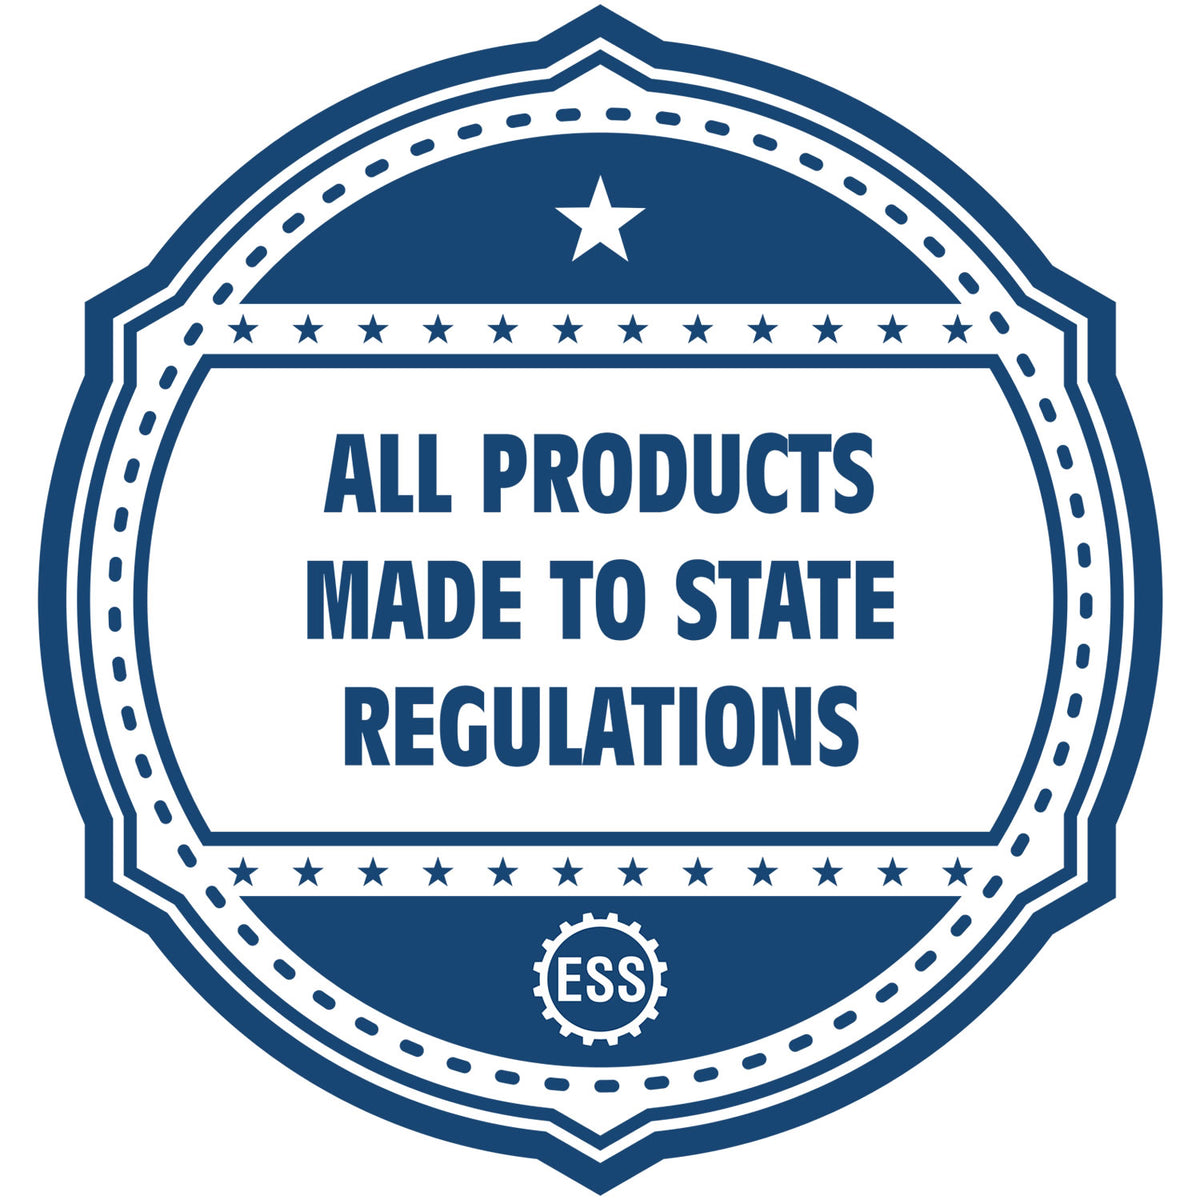 An icon or badge element for the Slim Pre-Inked Wyoming Architect Seal Stamp showing that this product is made in compliance with state regulations.